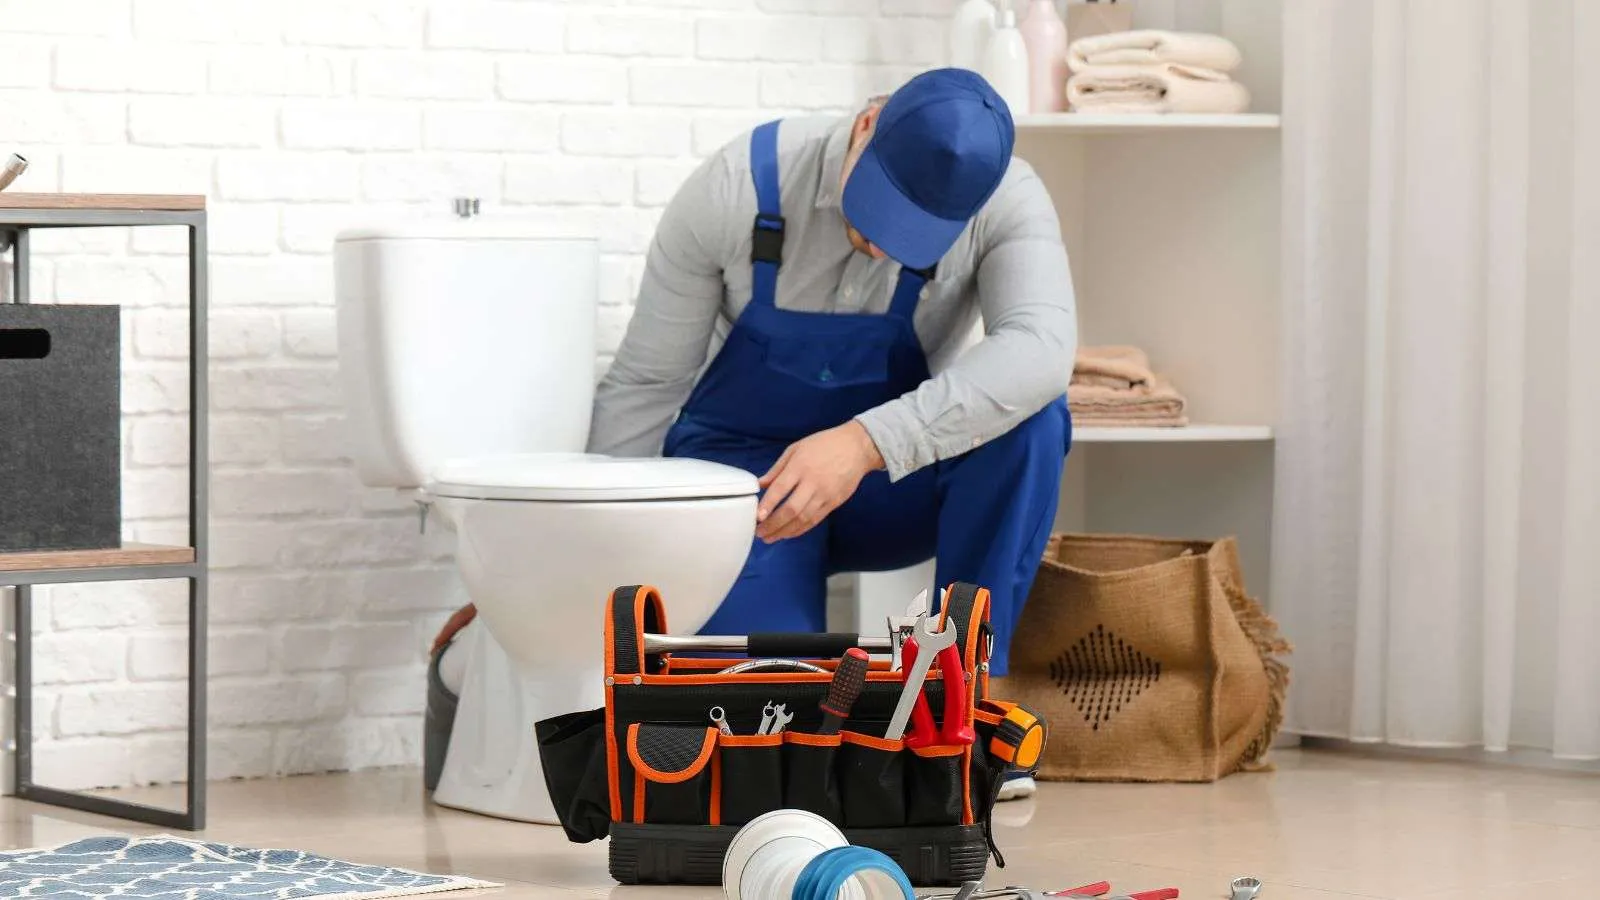 Sewer issue from your plumbing - bighomeprojects.com